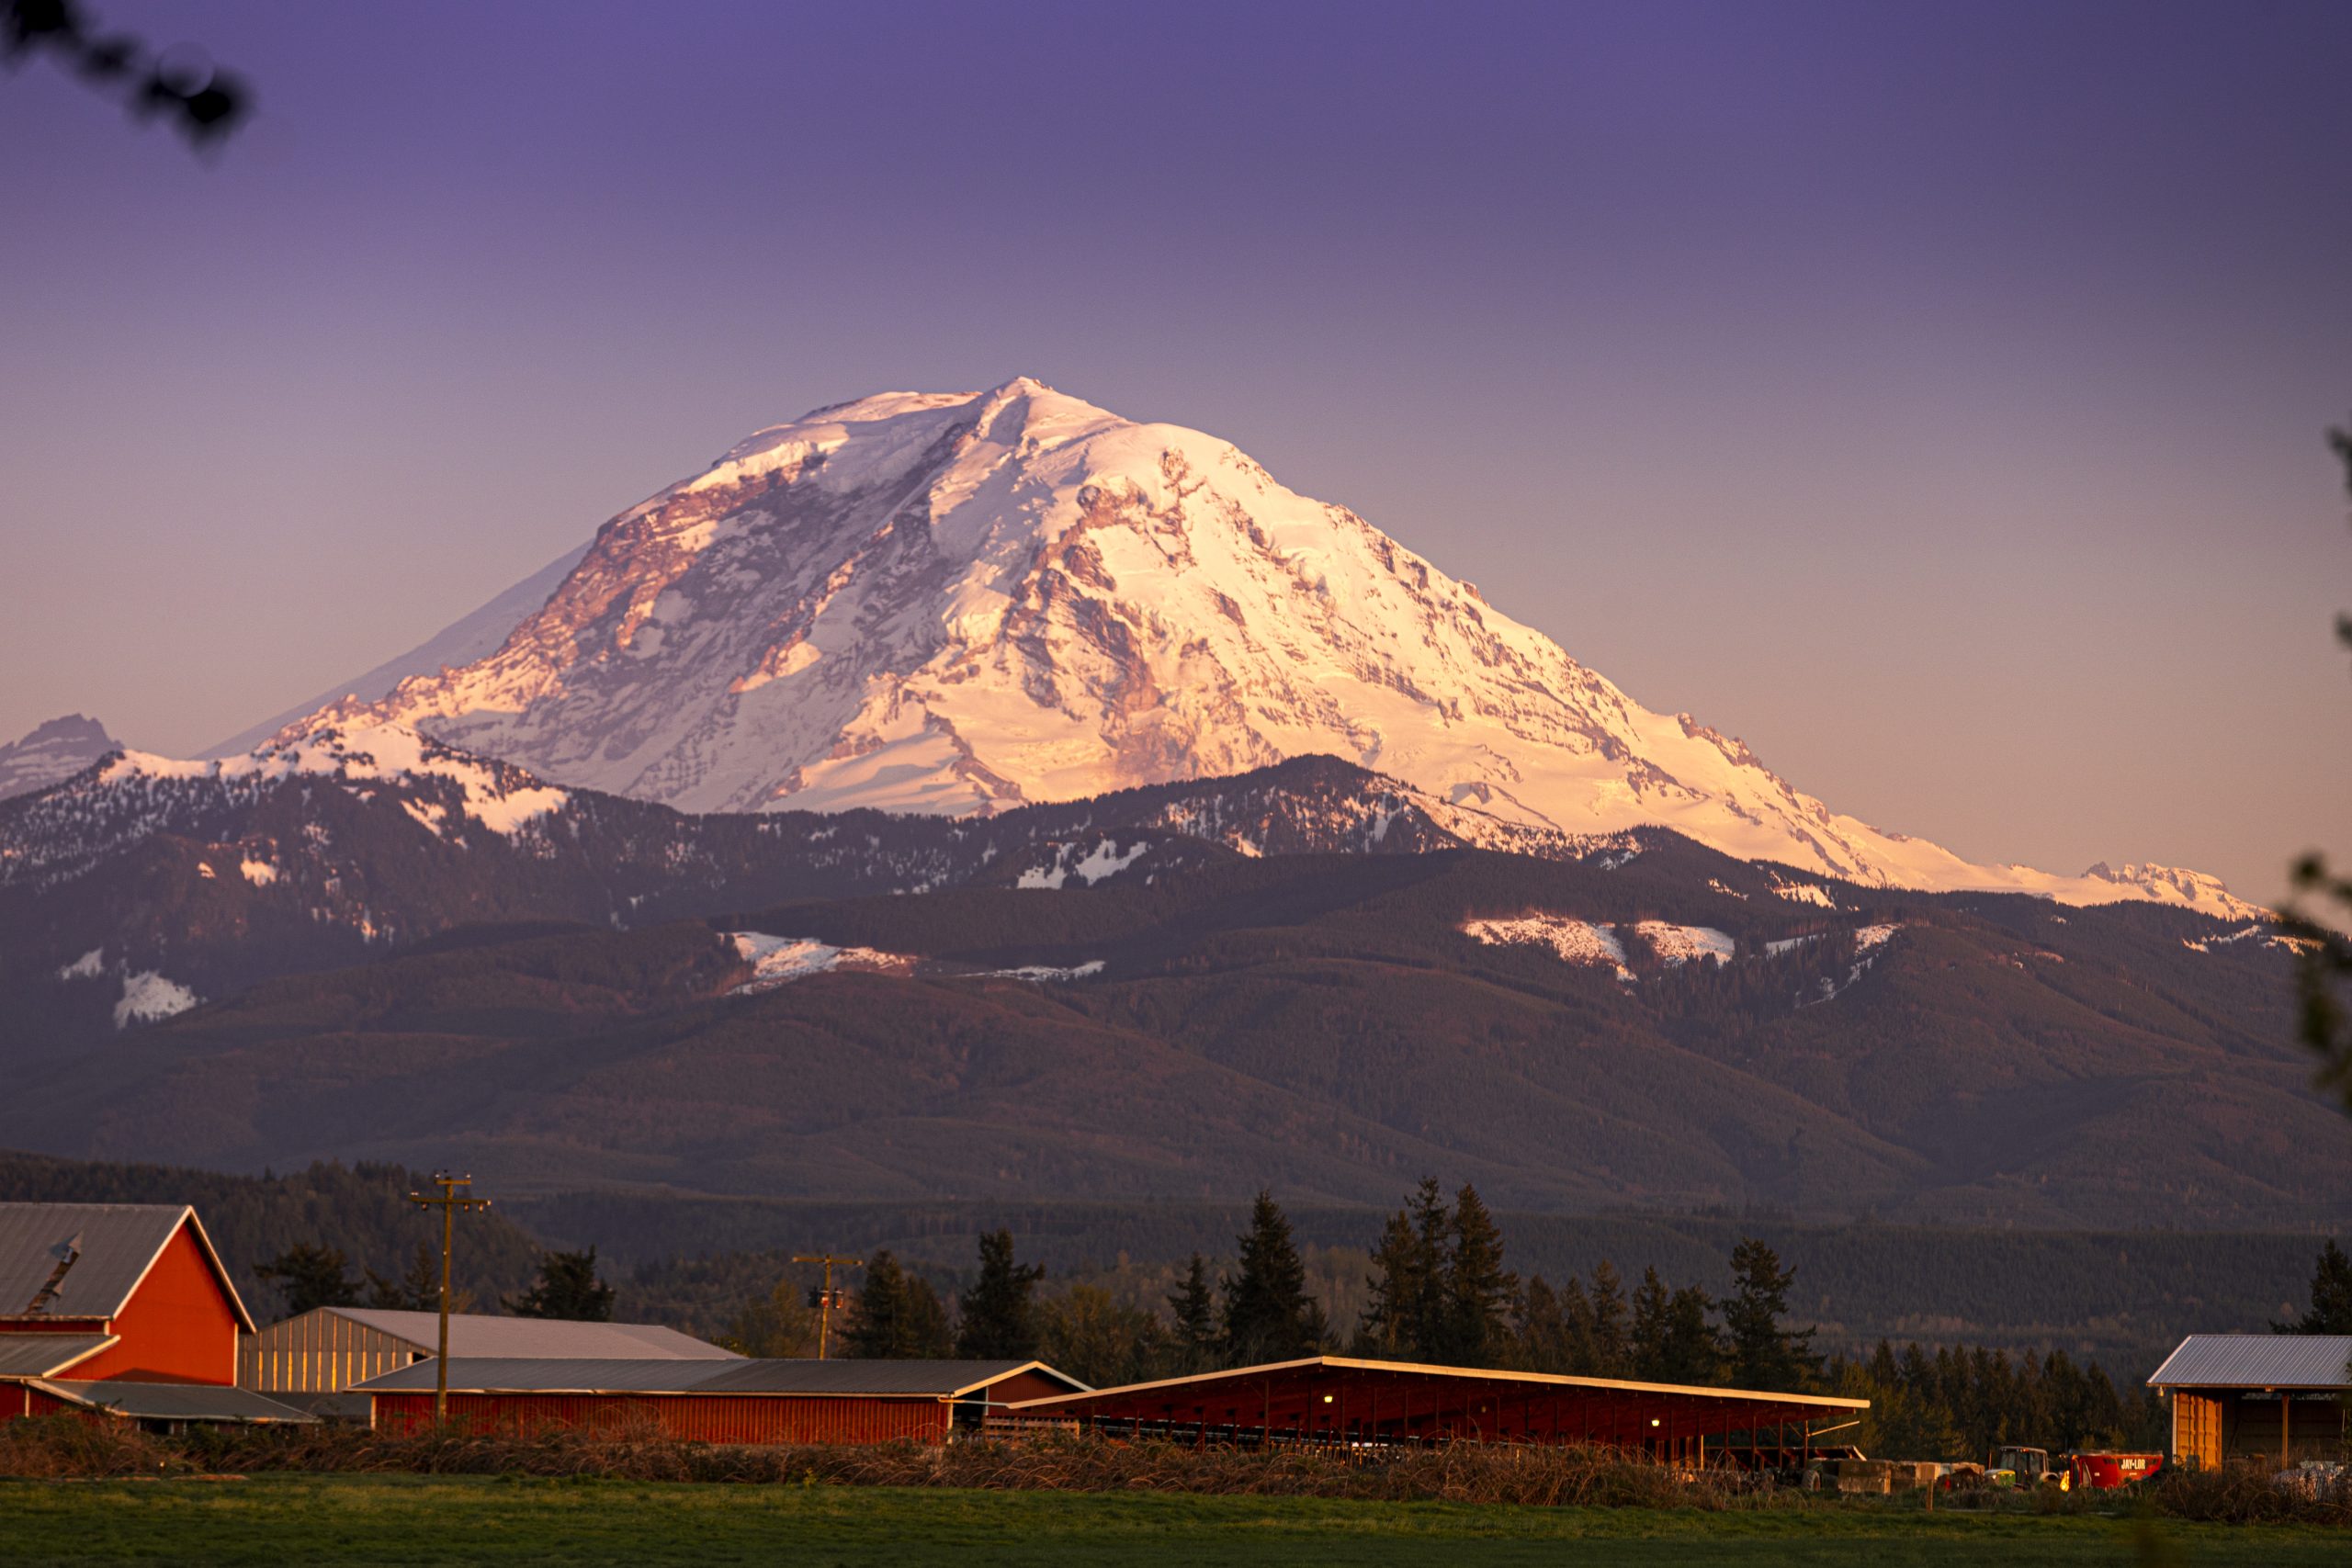 Rural community with Mt. Rainier in the background